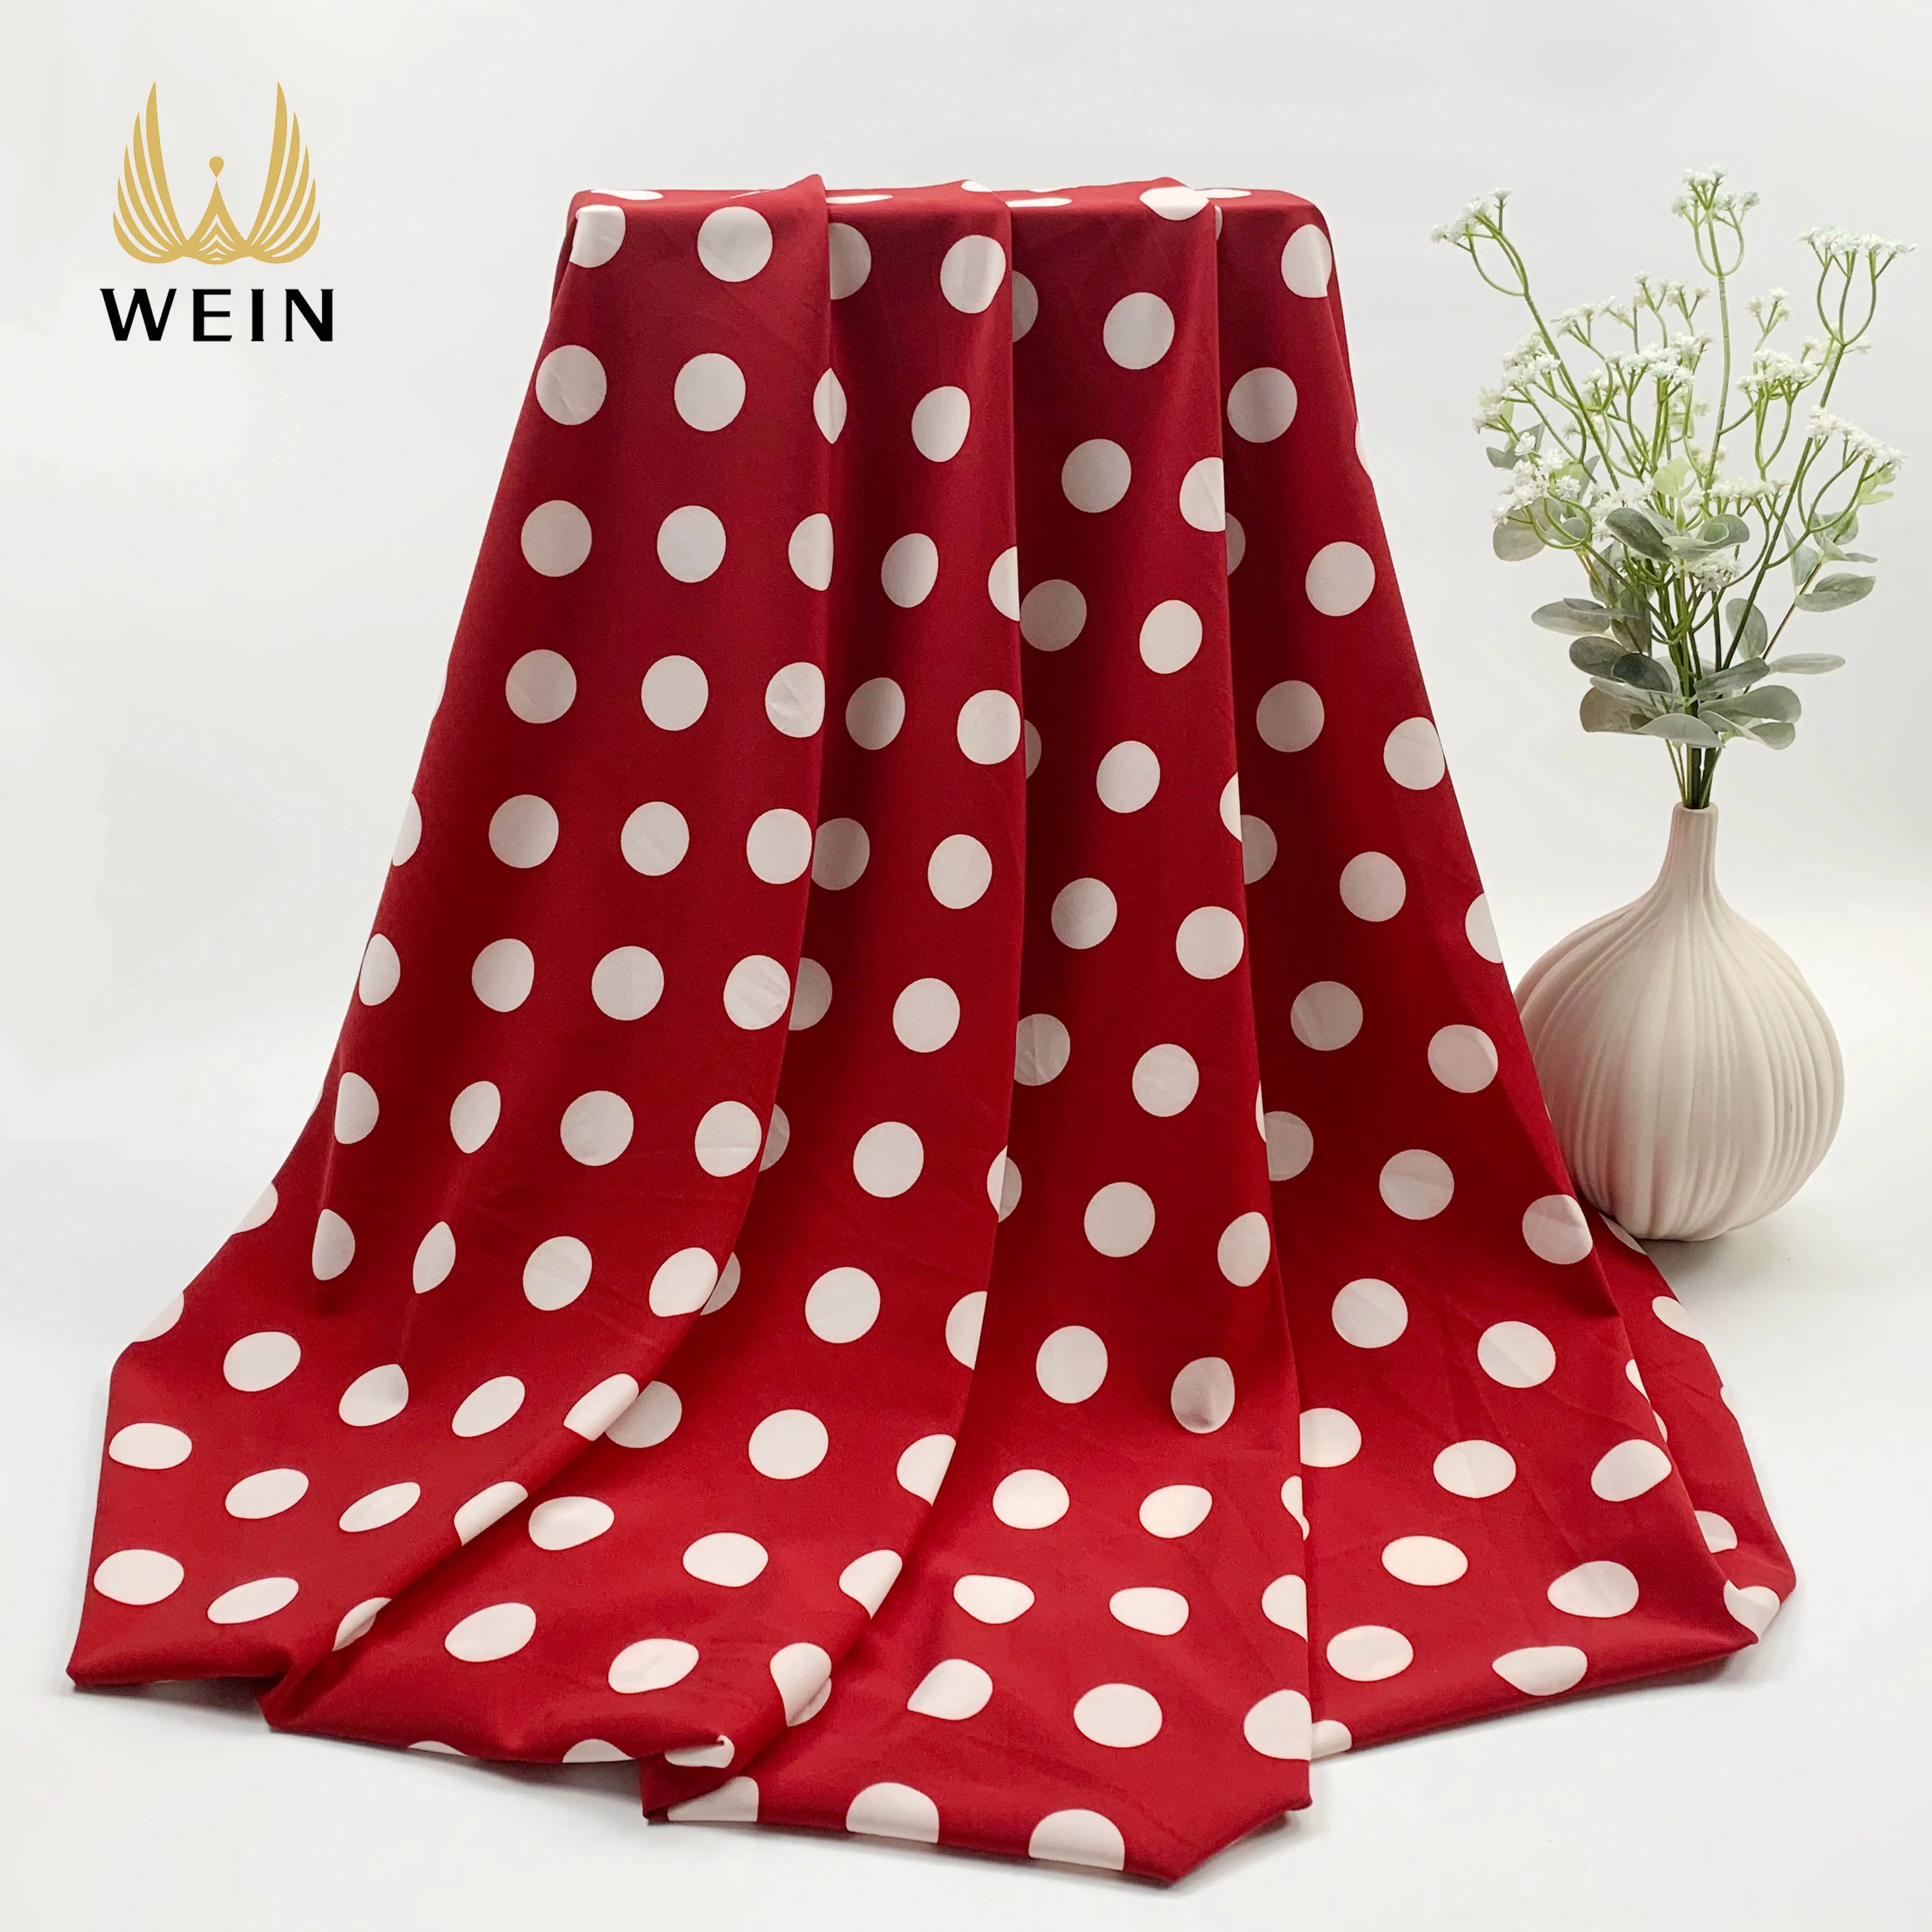 WI-D04 Polyester spandex 4 way stretch red and white polka dot print dress fabrics